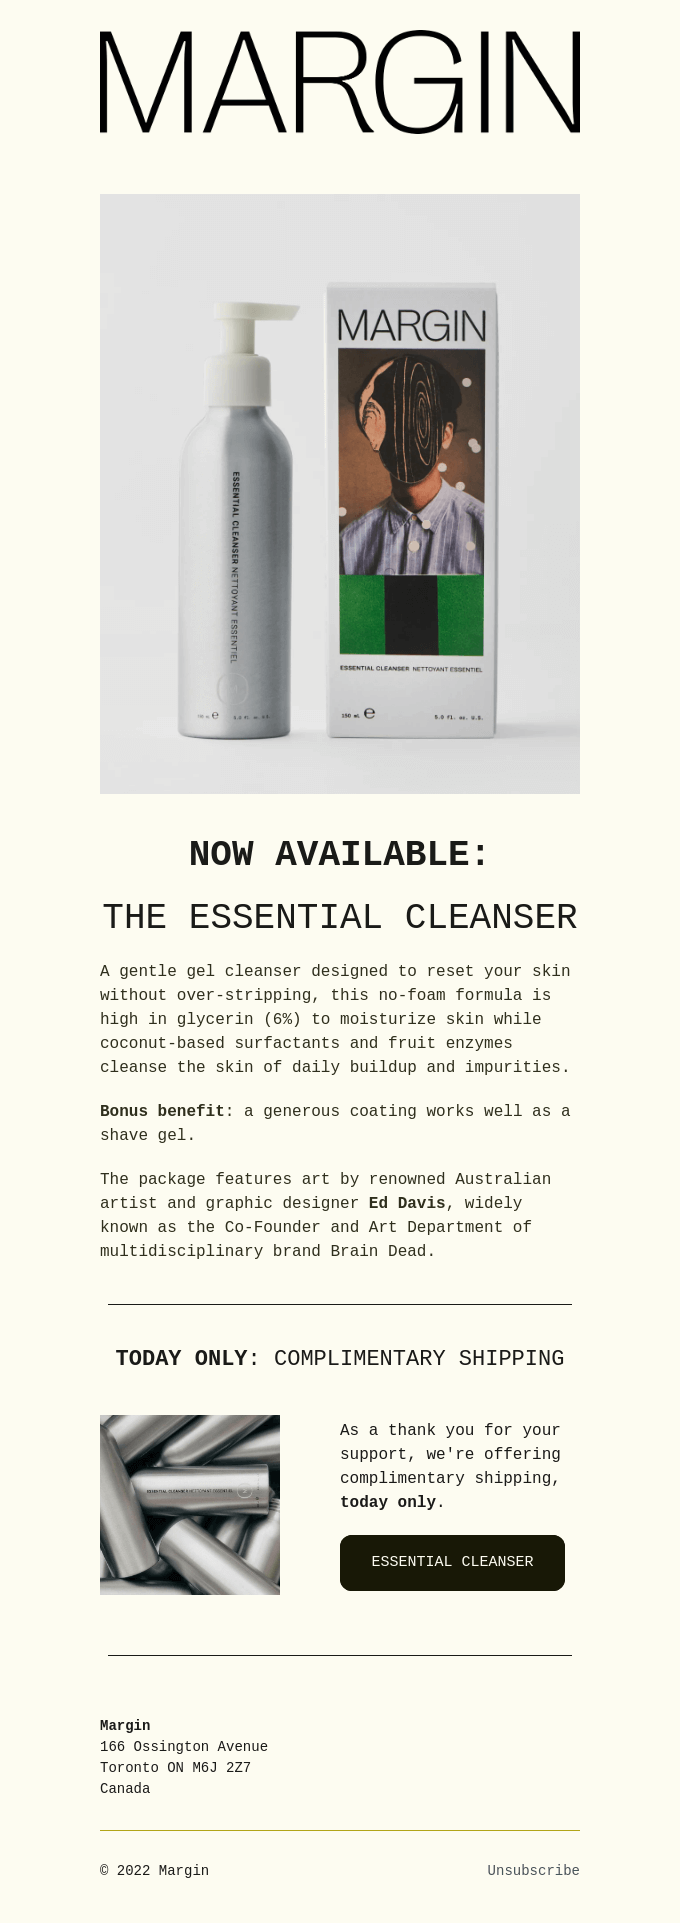 JUST LAUNCHED: THE ESSENTIAL CLEANSER